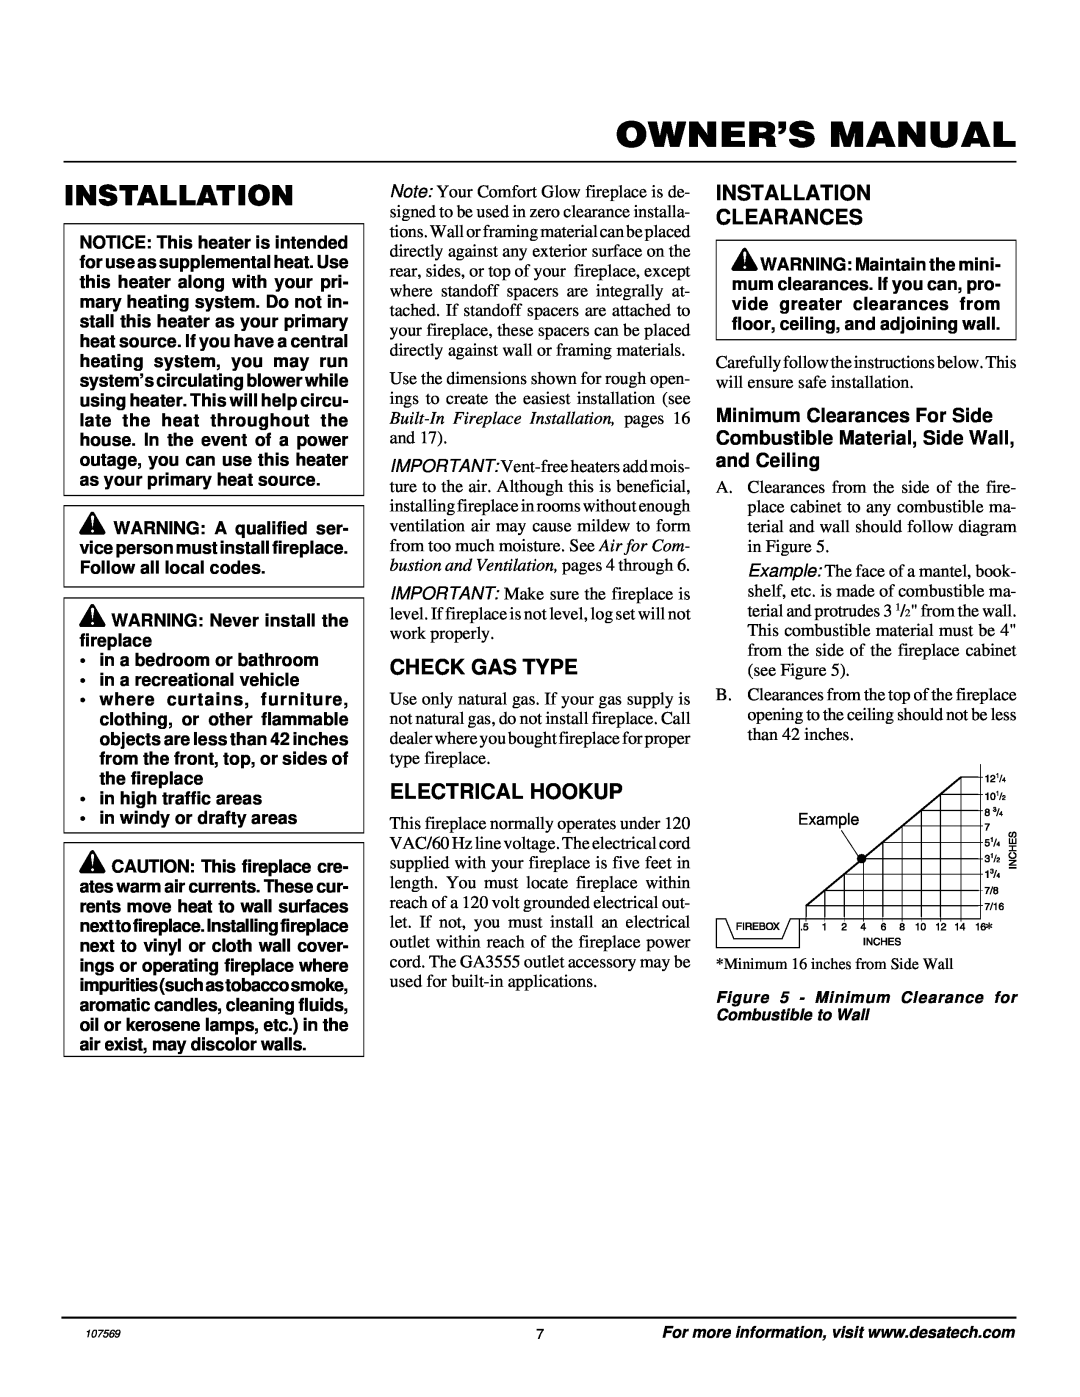 Desa CGEFP33NR installation manual Check Gas Type, Electrical Hookup, Installation Clearances 